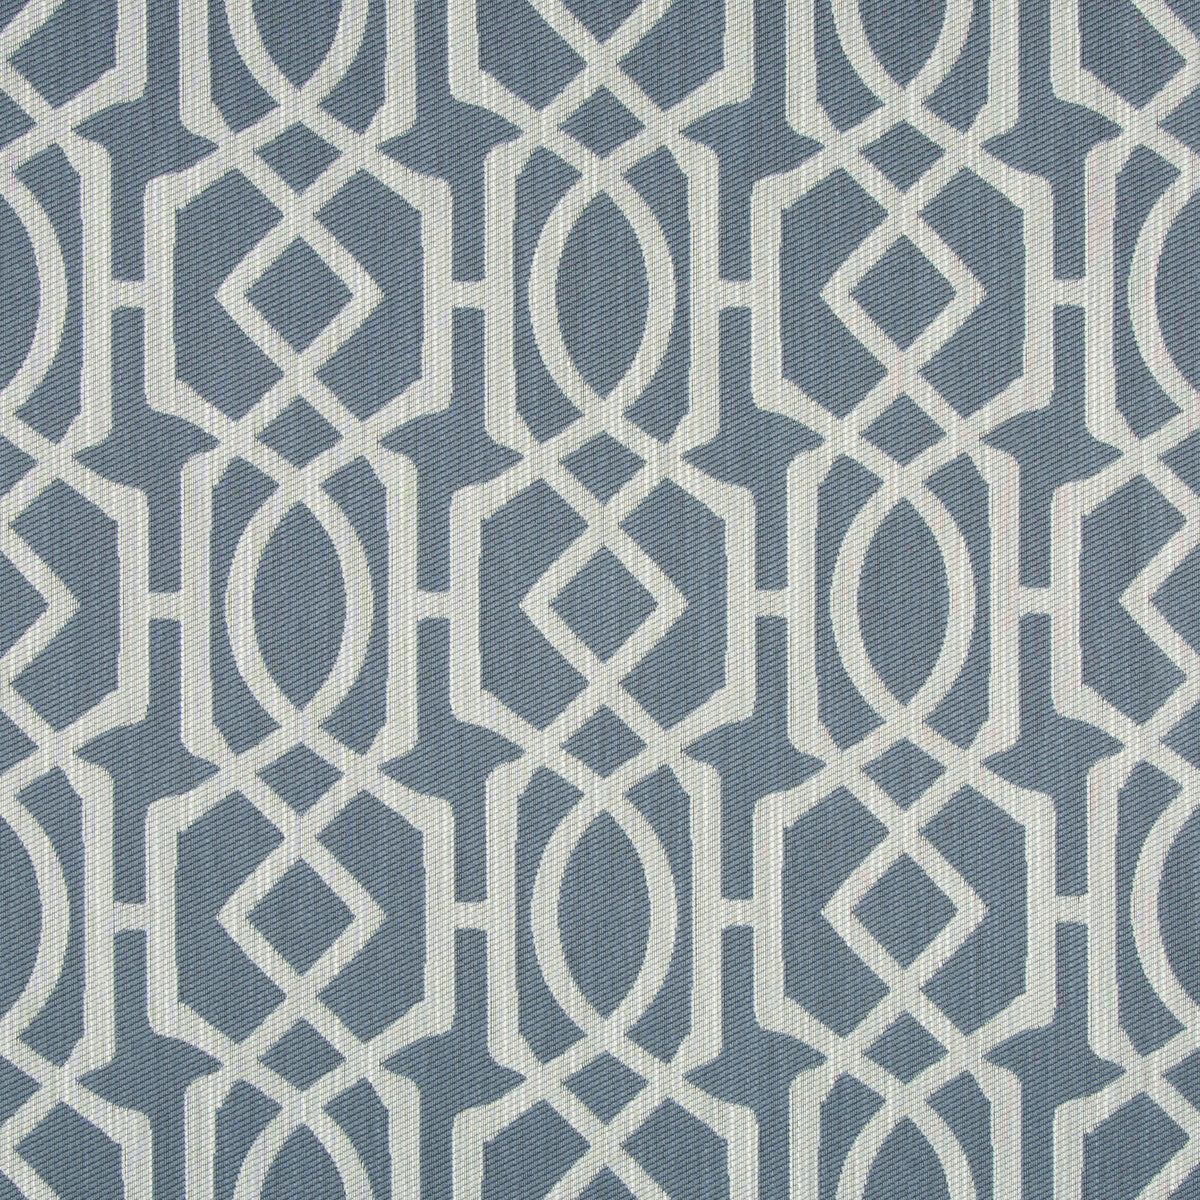 Kravet Design fabric in 34700-5 color - pattern 34700.5.0 - by Kravet Design in the Crypton Home collection